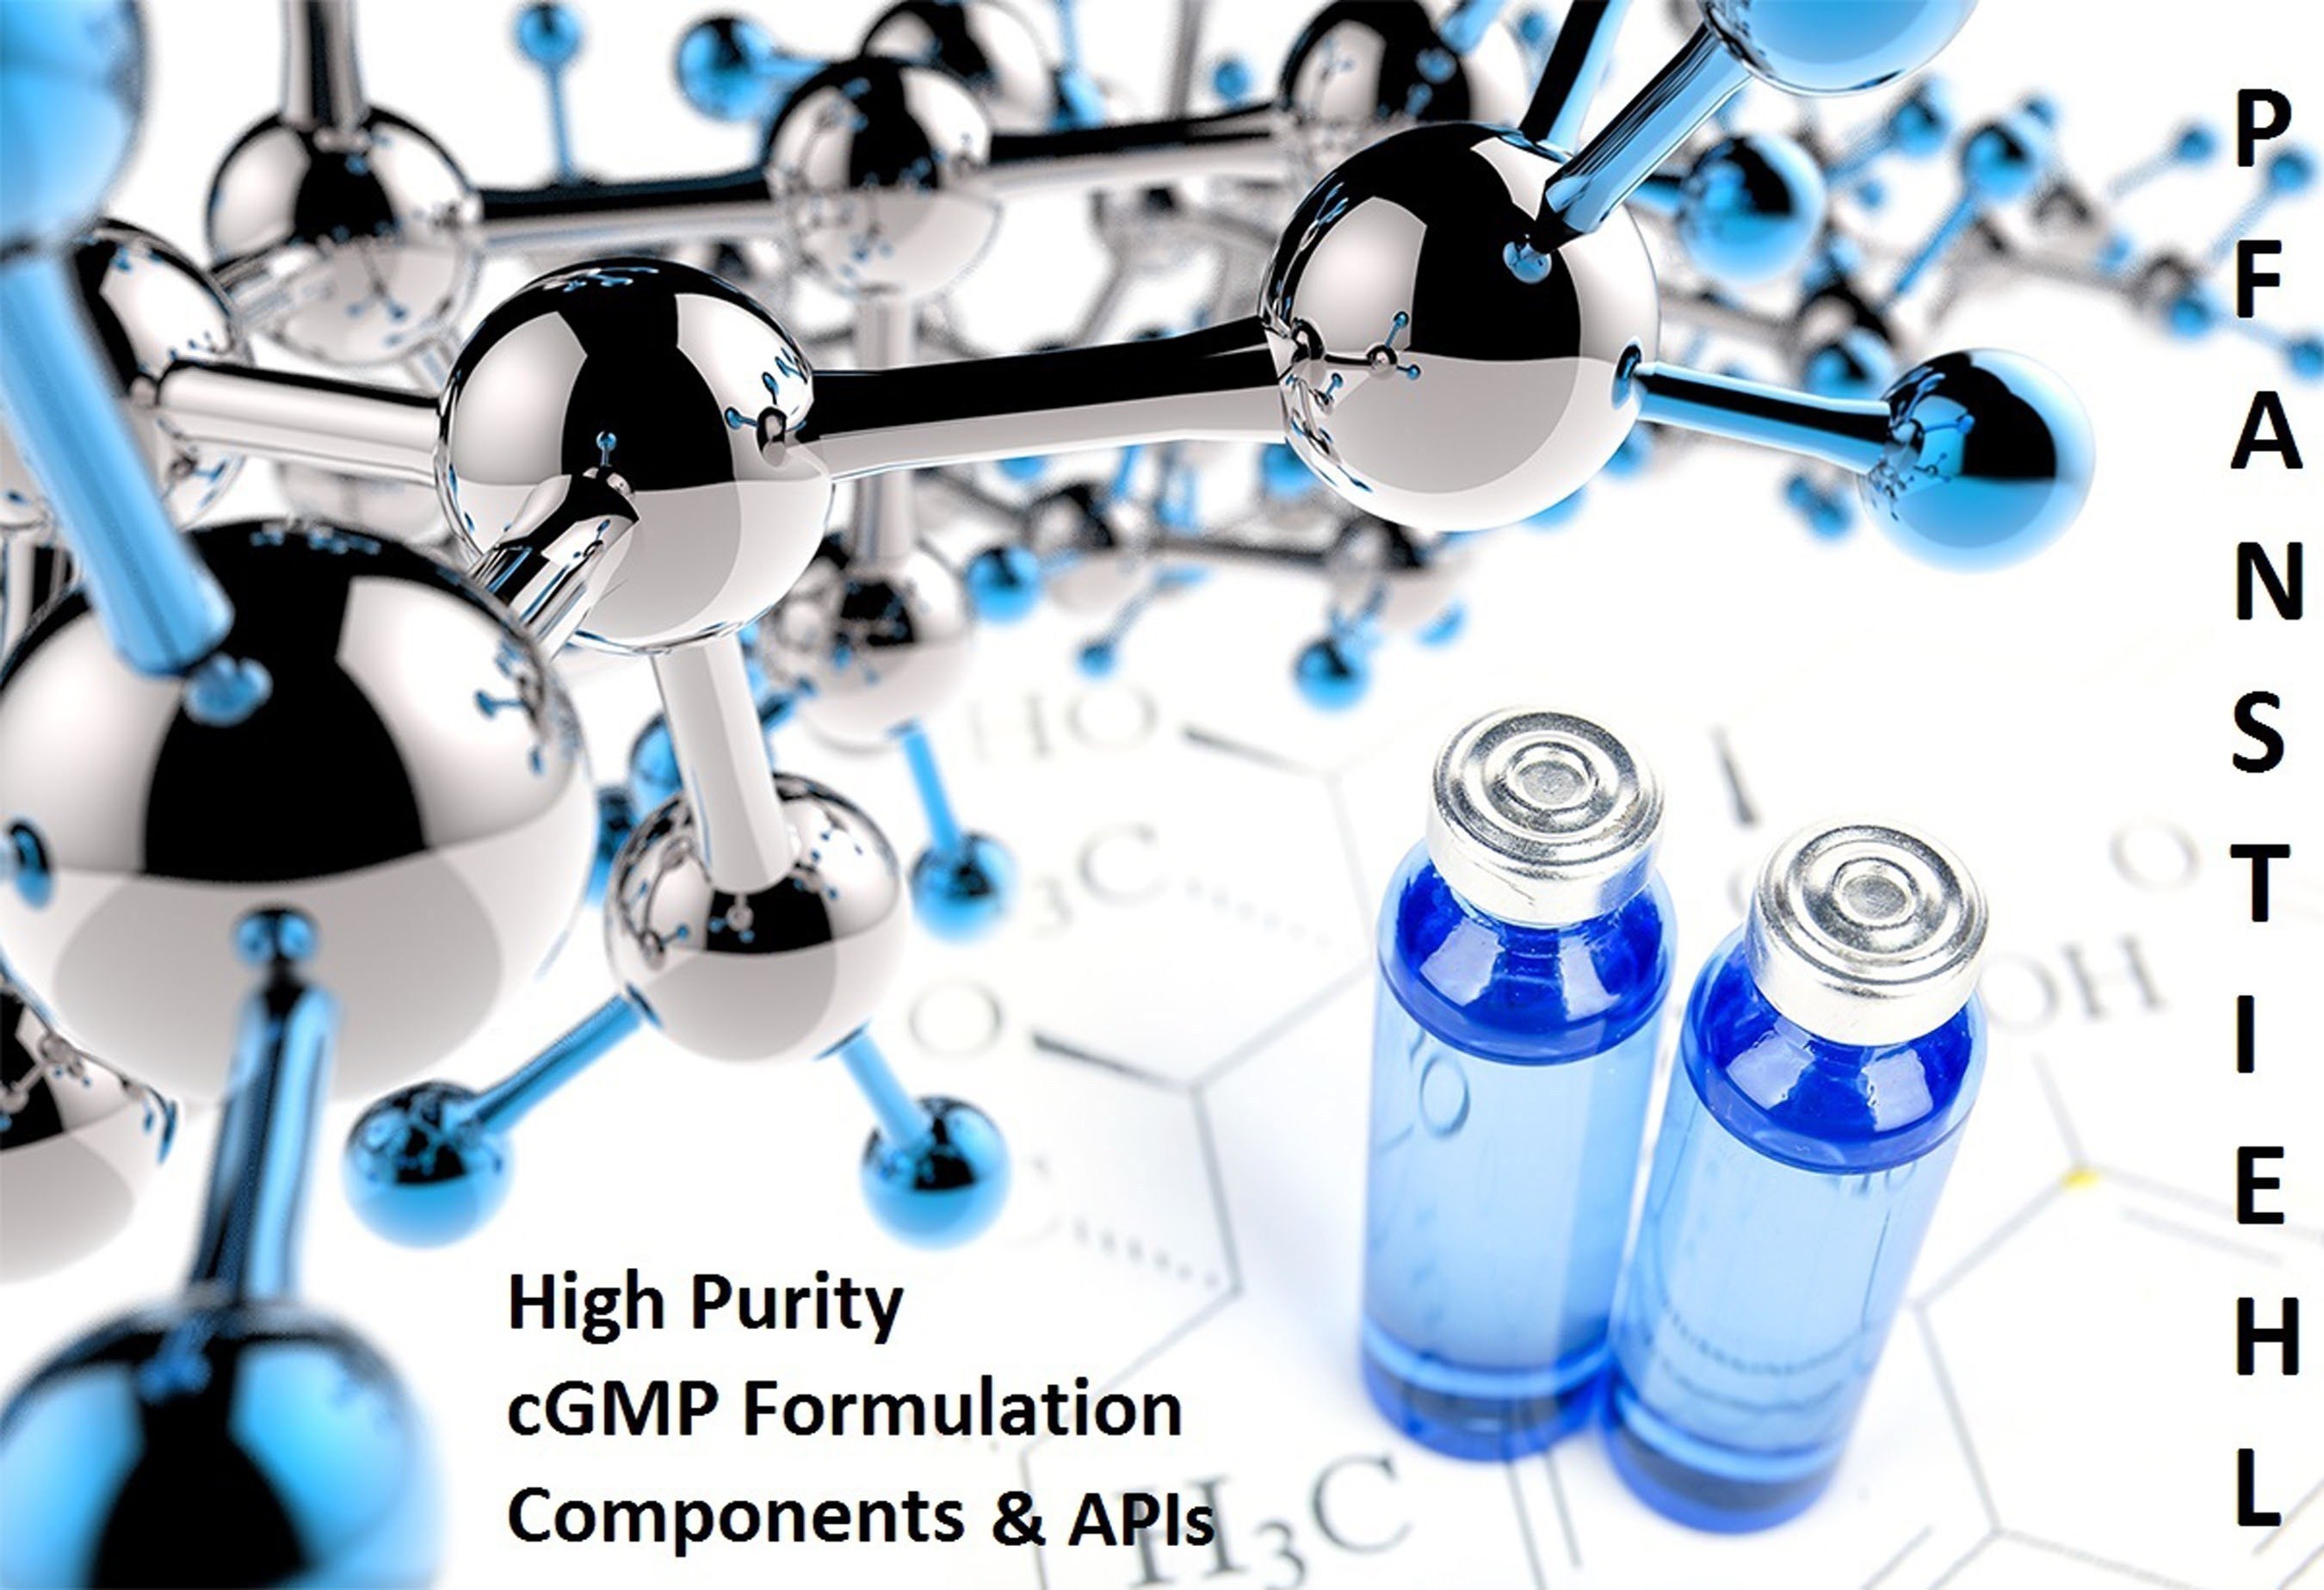 Pfanstiehl: US-Based cGMP Manufacturing of APIs and Biopharmaceutical Formulation Components